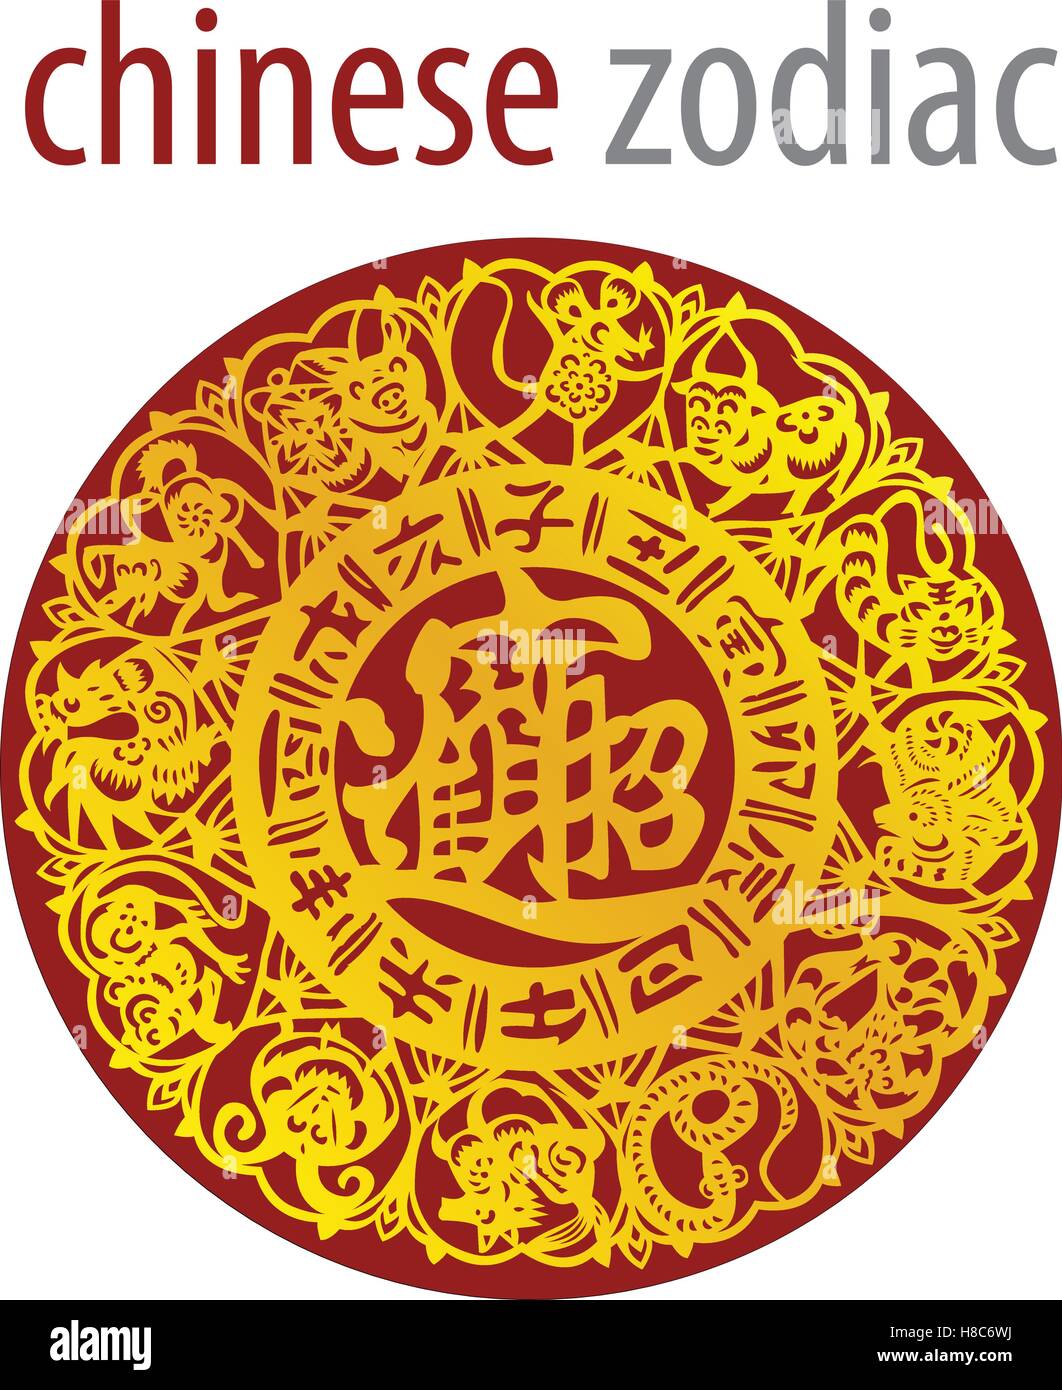 Chinese zodiac wheel with signs and the five elements symbols Stock Vector